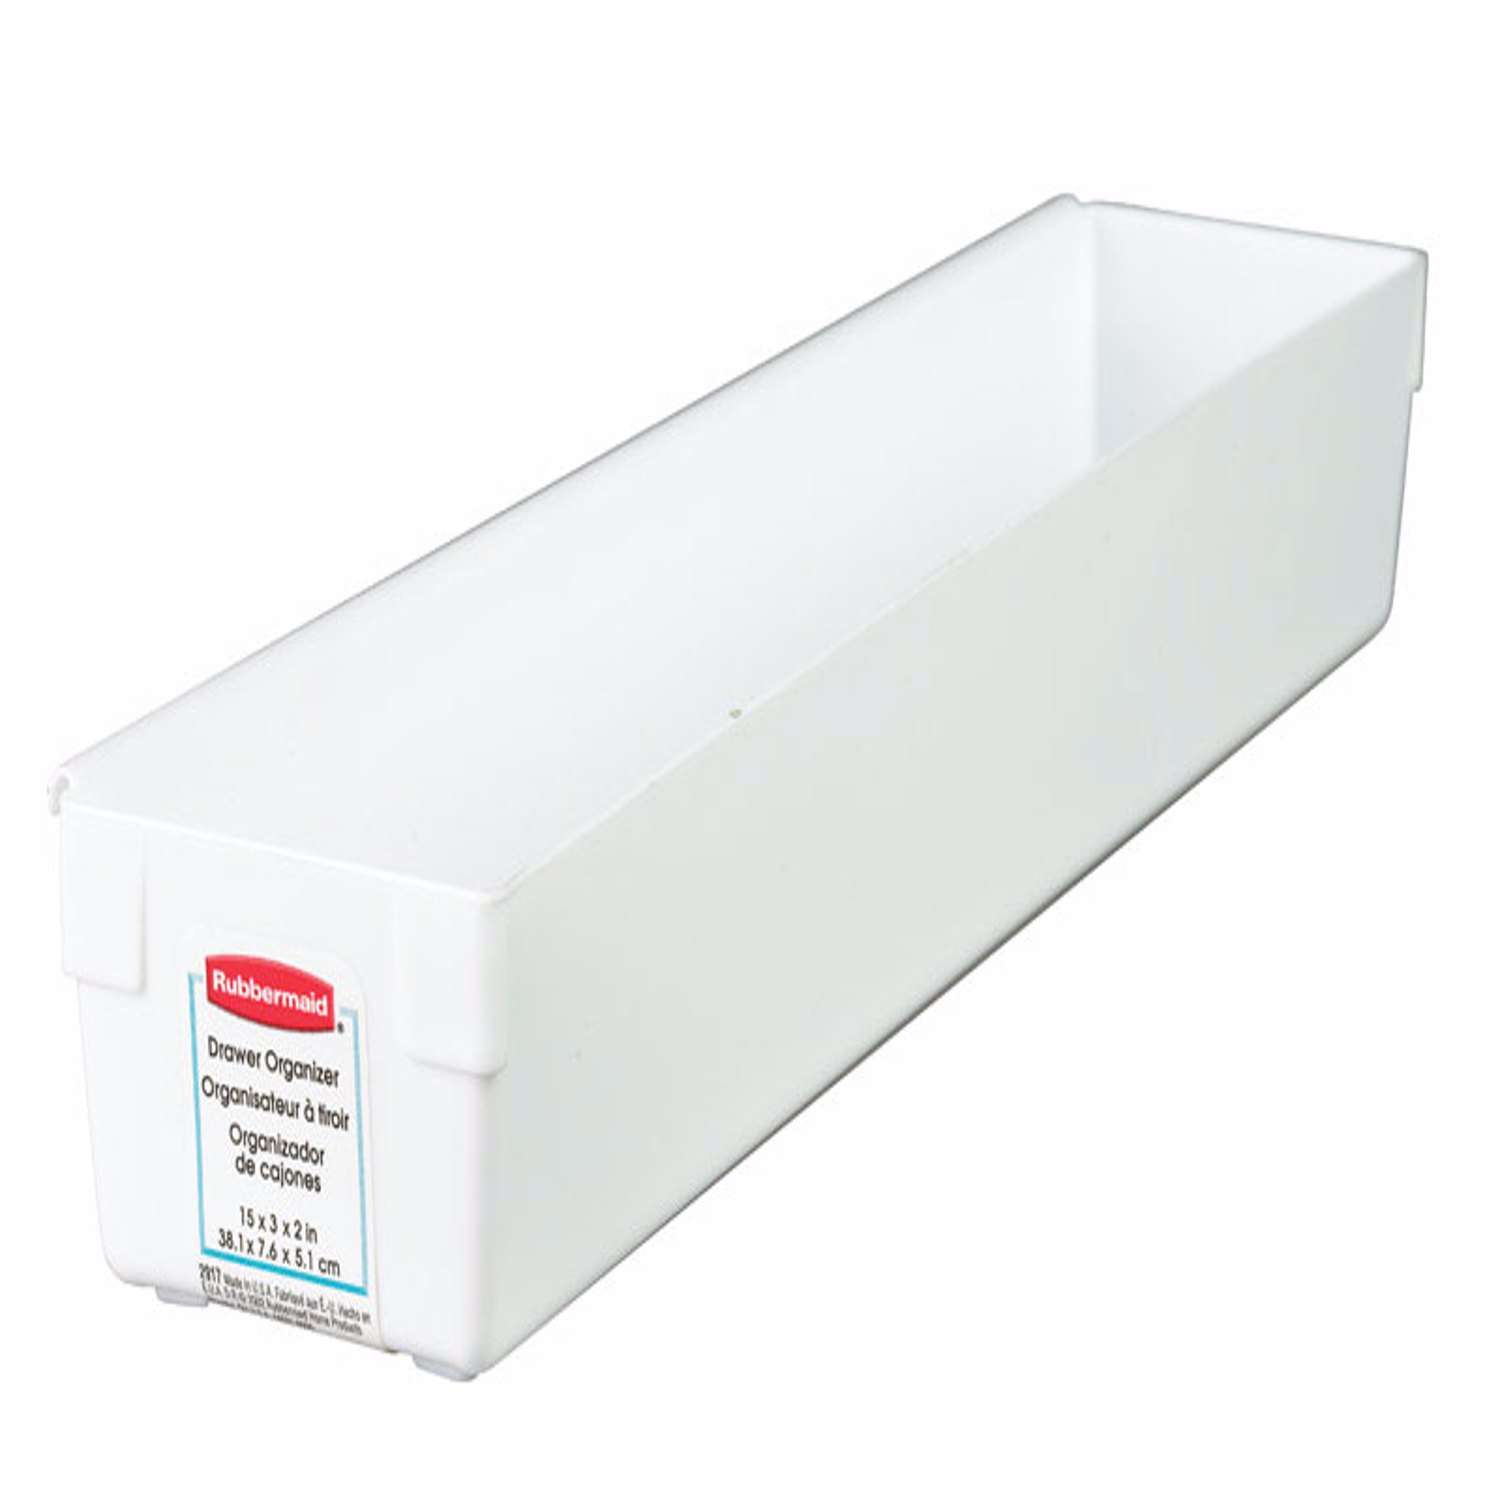 Pack of 12 Rubbermaid 2917-RD WHT White Plastic Drawer Organizer 15 L in. 